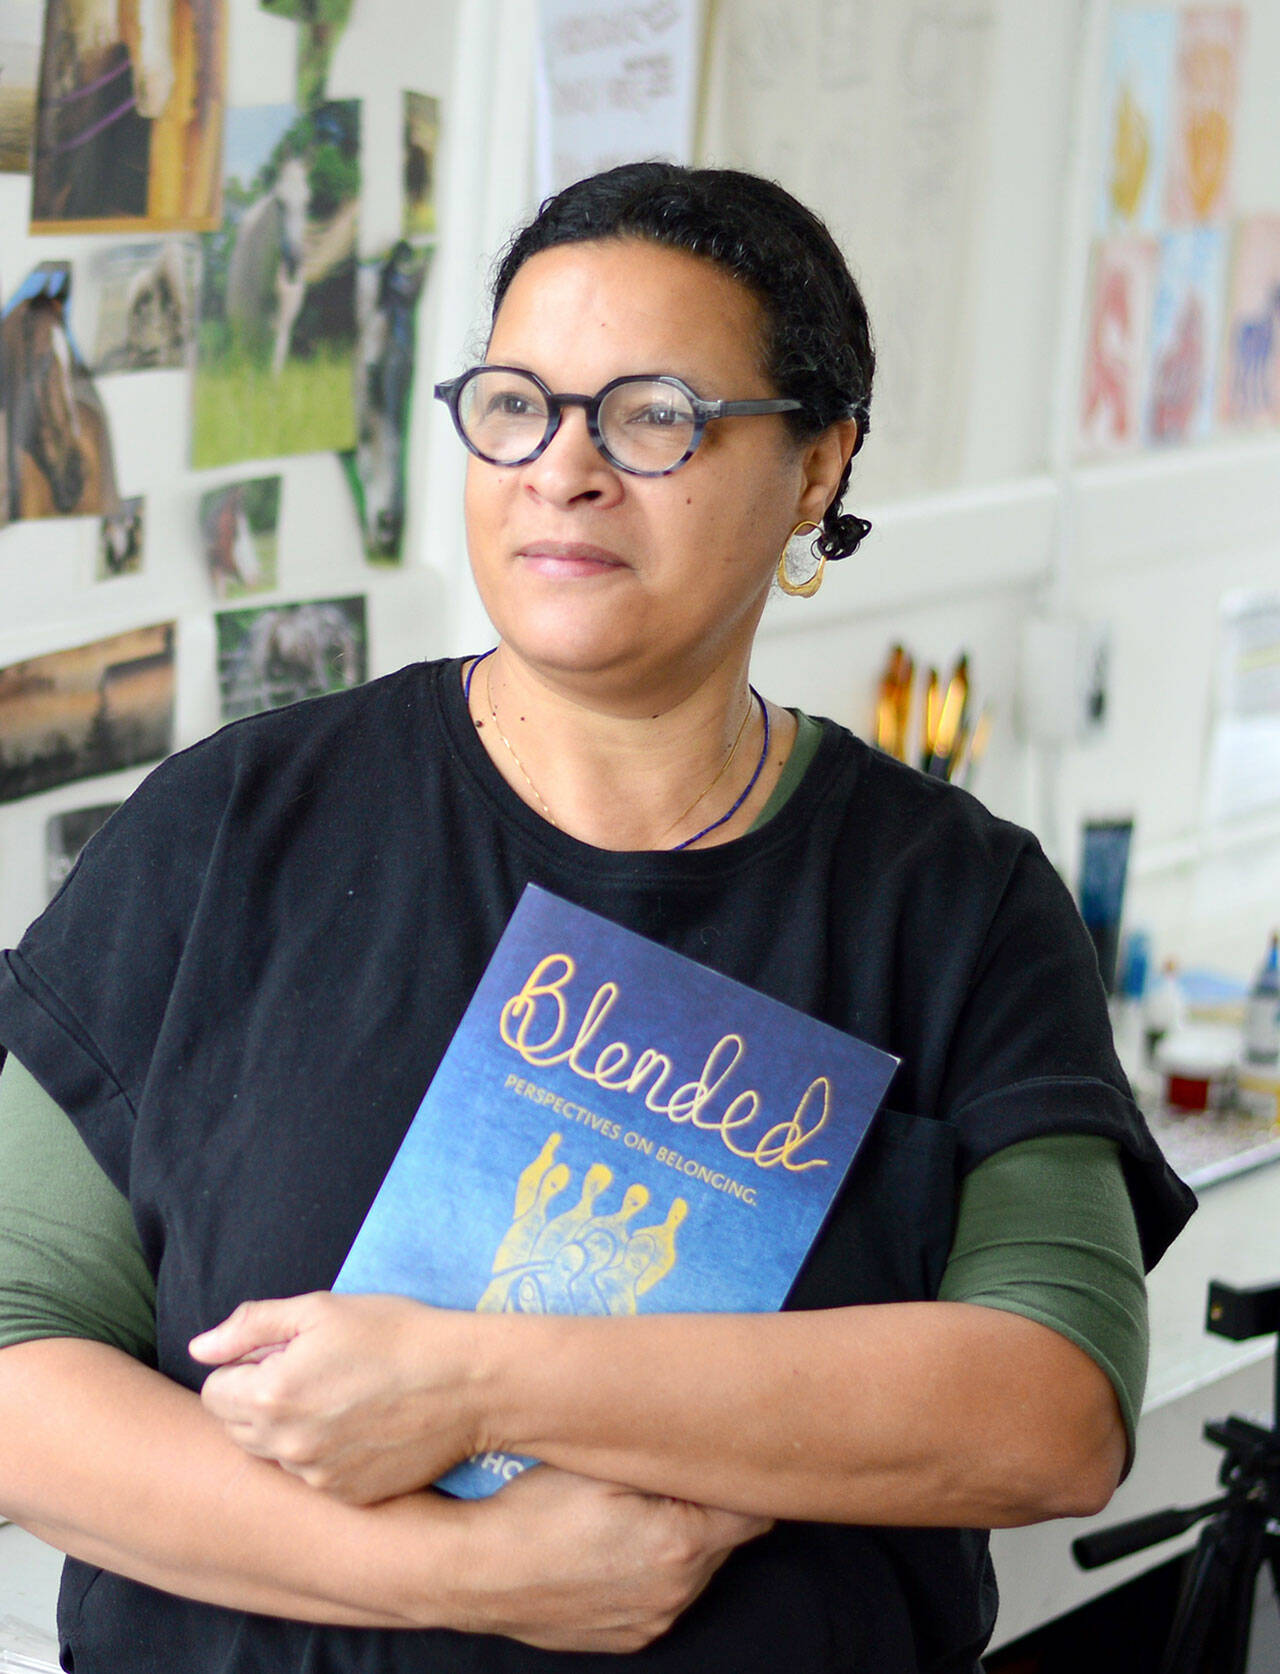 Local author Velda Thomas’ new book, “Blended: Perspectives on Belonging” will fuel an online discussion group starting this Saturday. (Diane Urbani de la Paz/Peninsula Daily News)